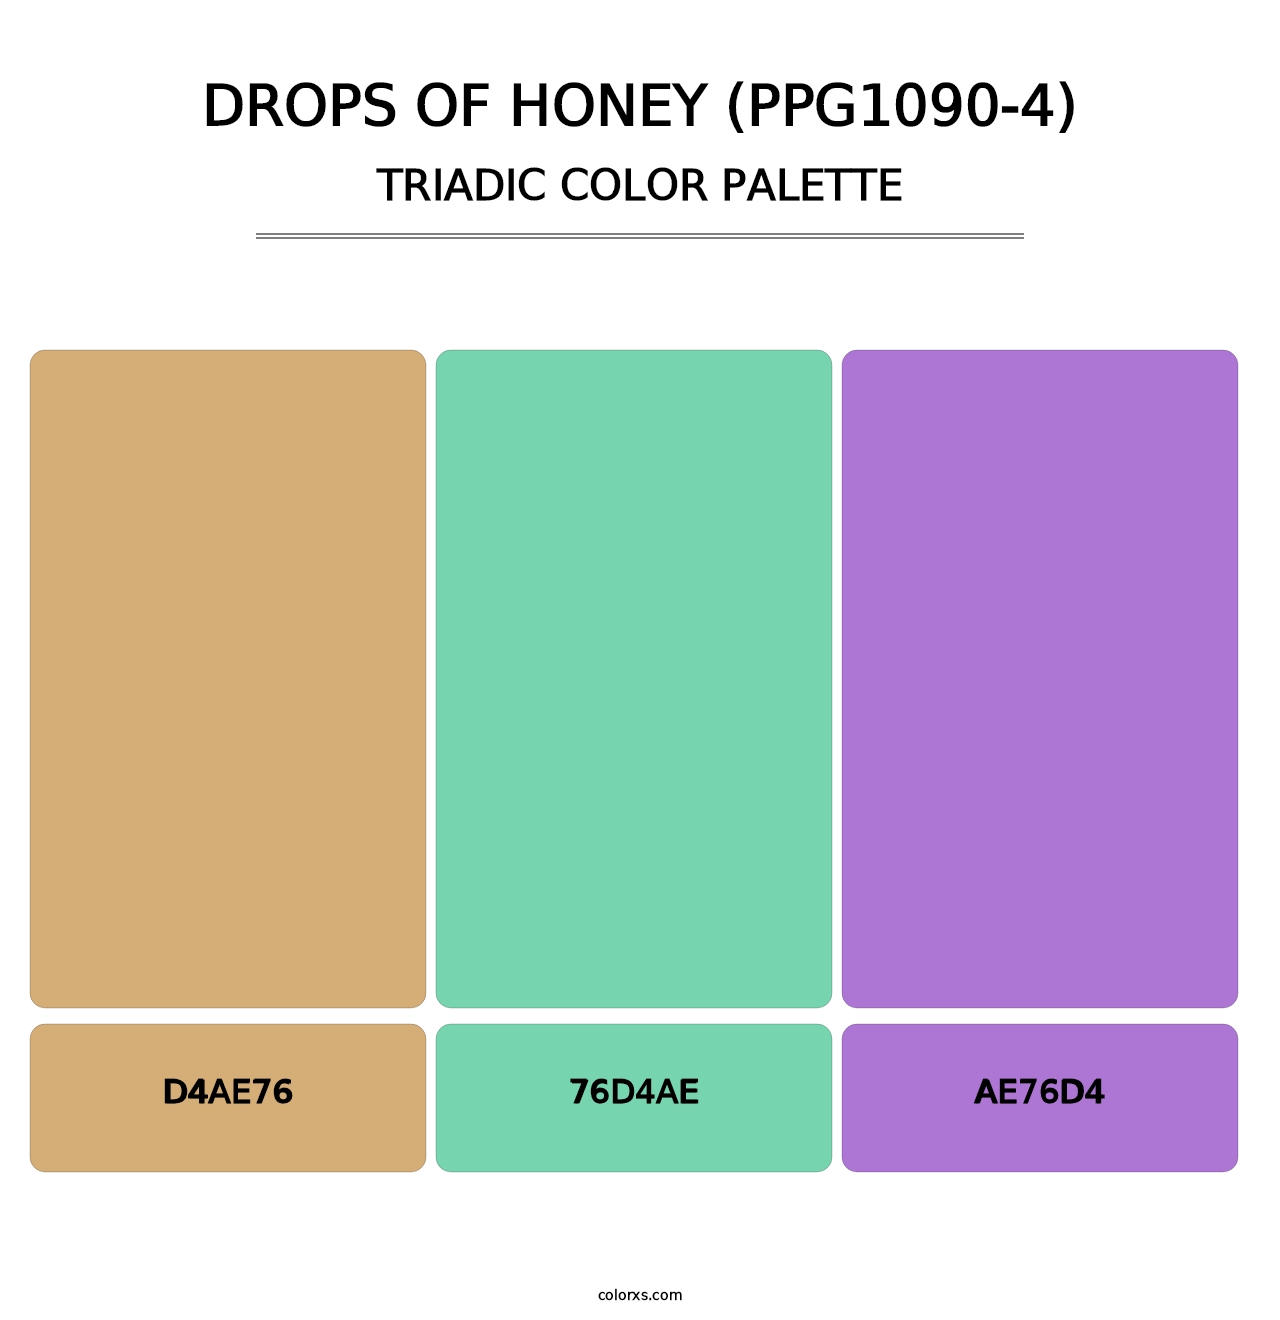 Drops Of Honey (PPG1090-4) - Triadic Color Palette